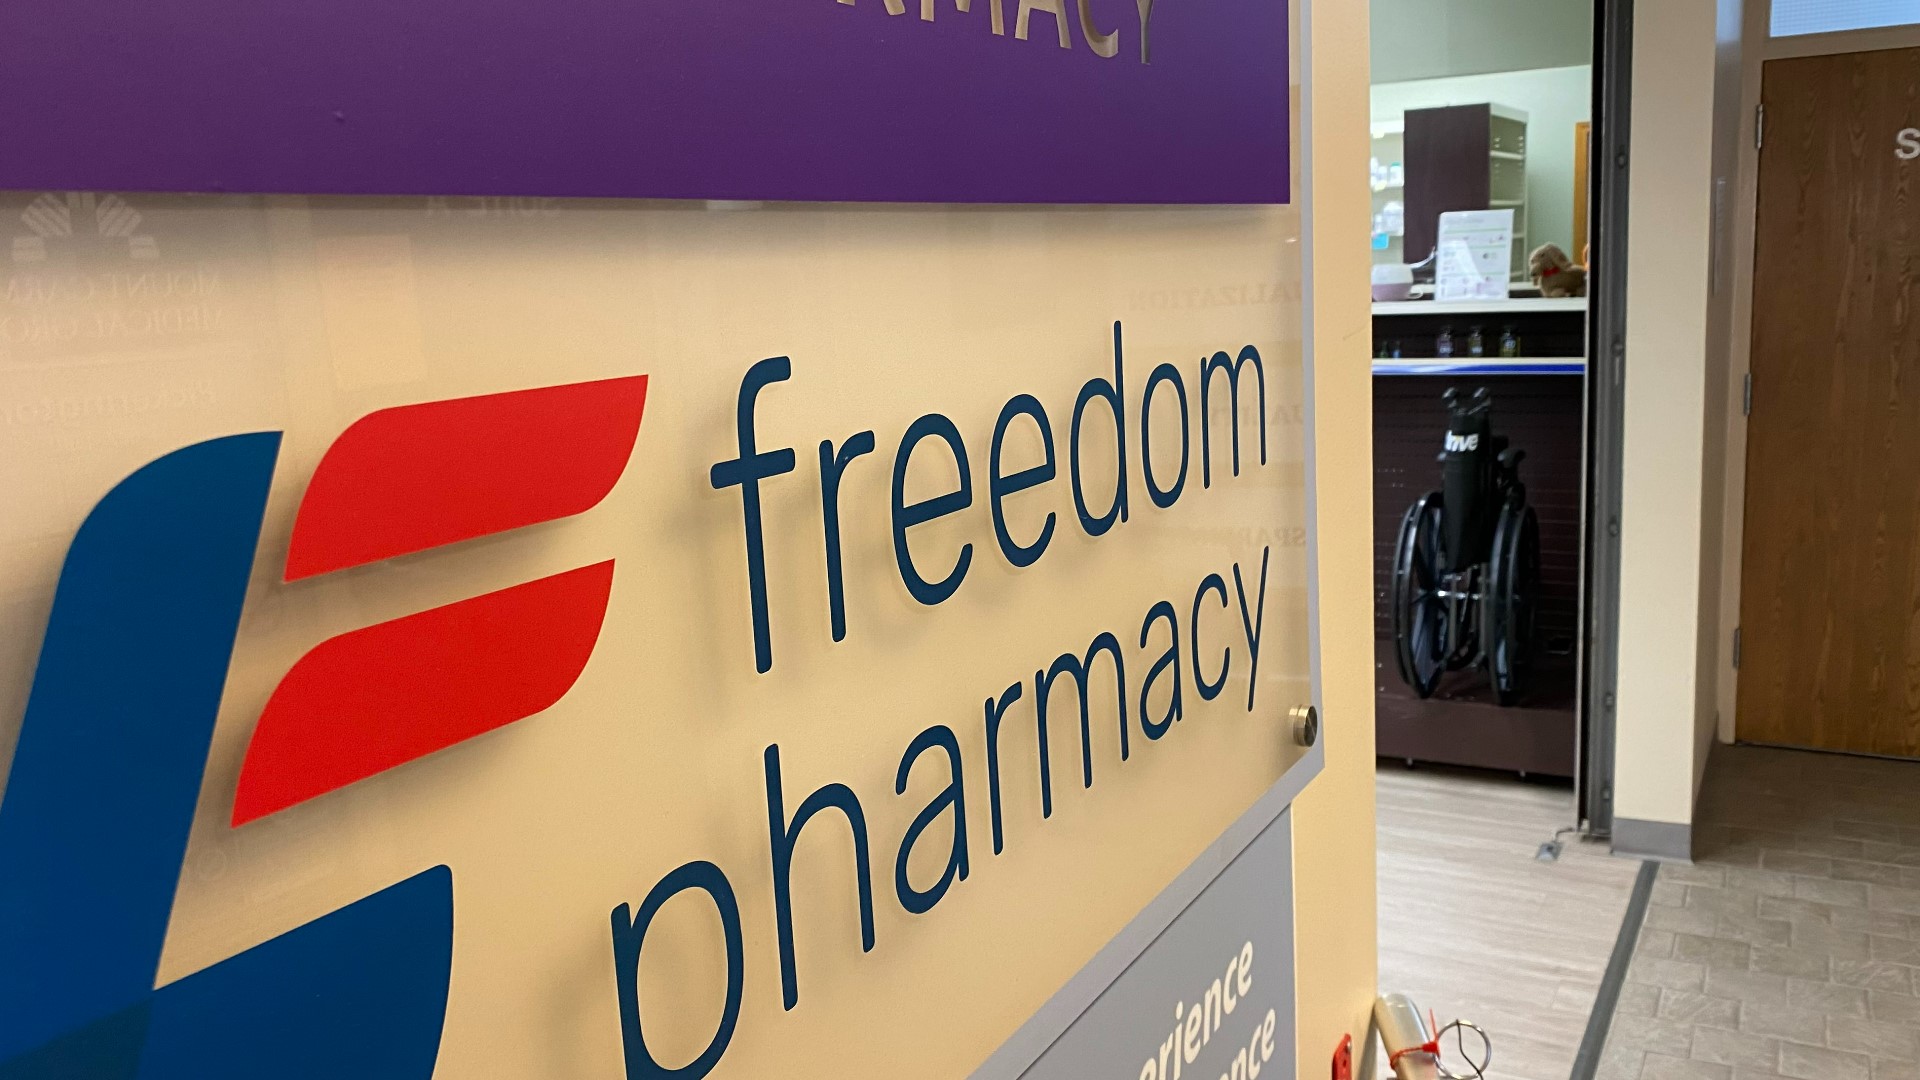 Pharmacist Nate Hux started Freedom Pharmacy in Pickerington nearly two years ago out of concern about the inflated prices.